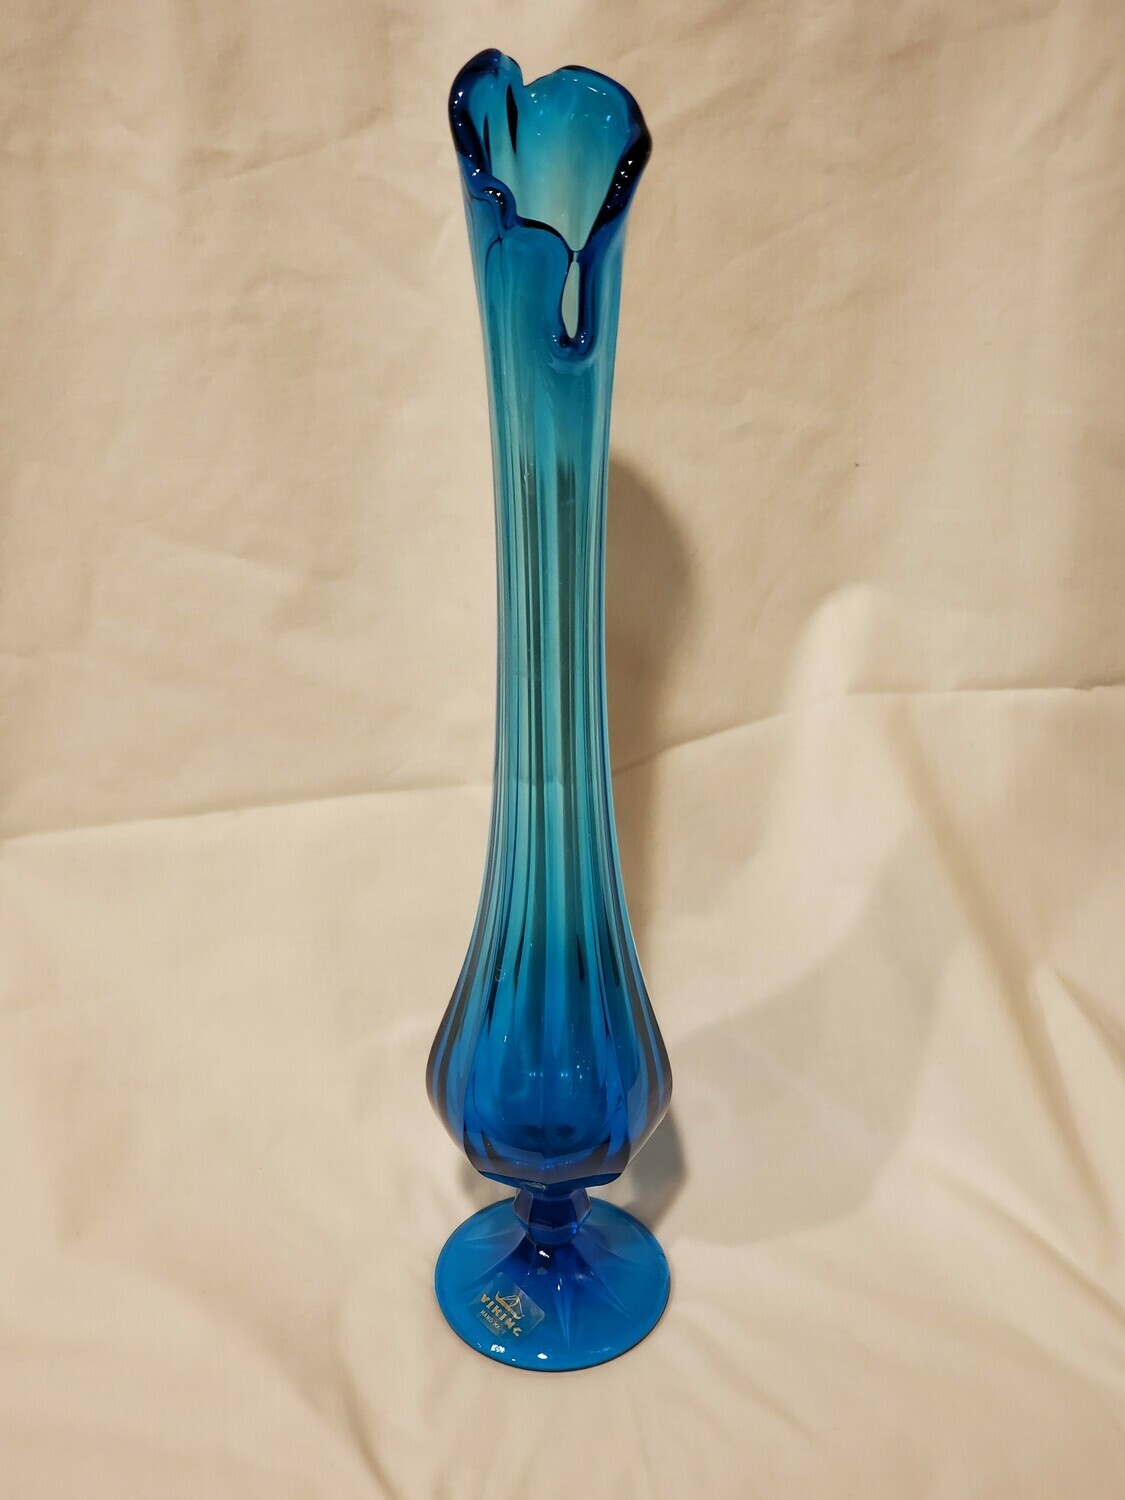 RARE Viking Epic Blue (Bluenique), Swung Vase, Footed, 15 1/4" H, Enneagon Pattern.